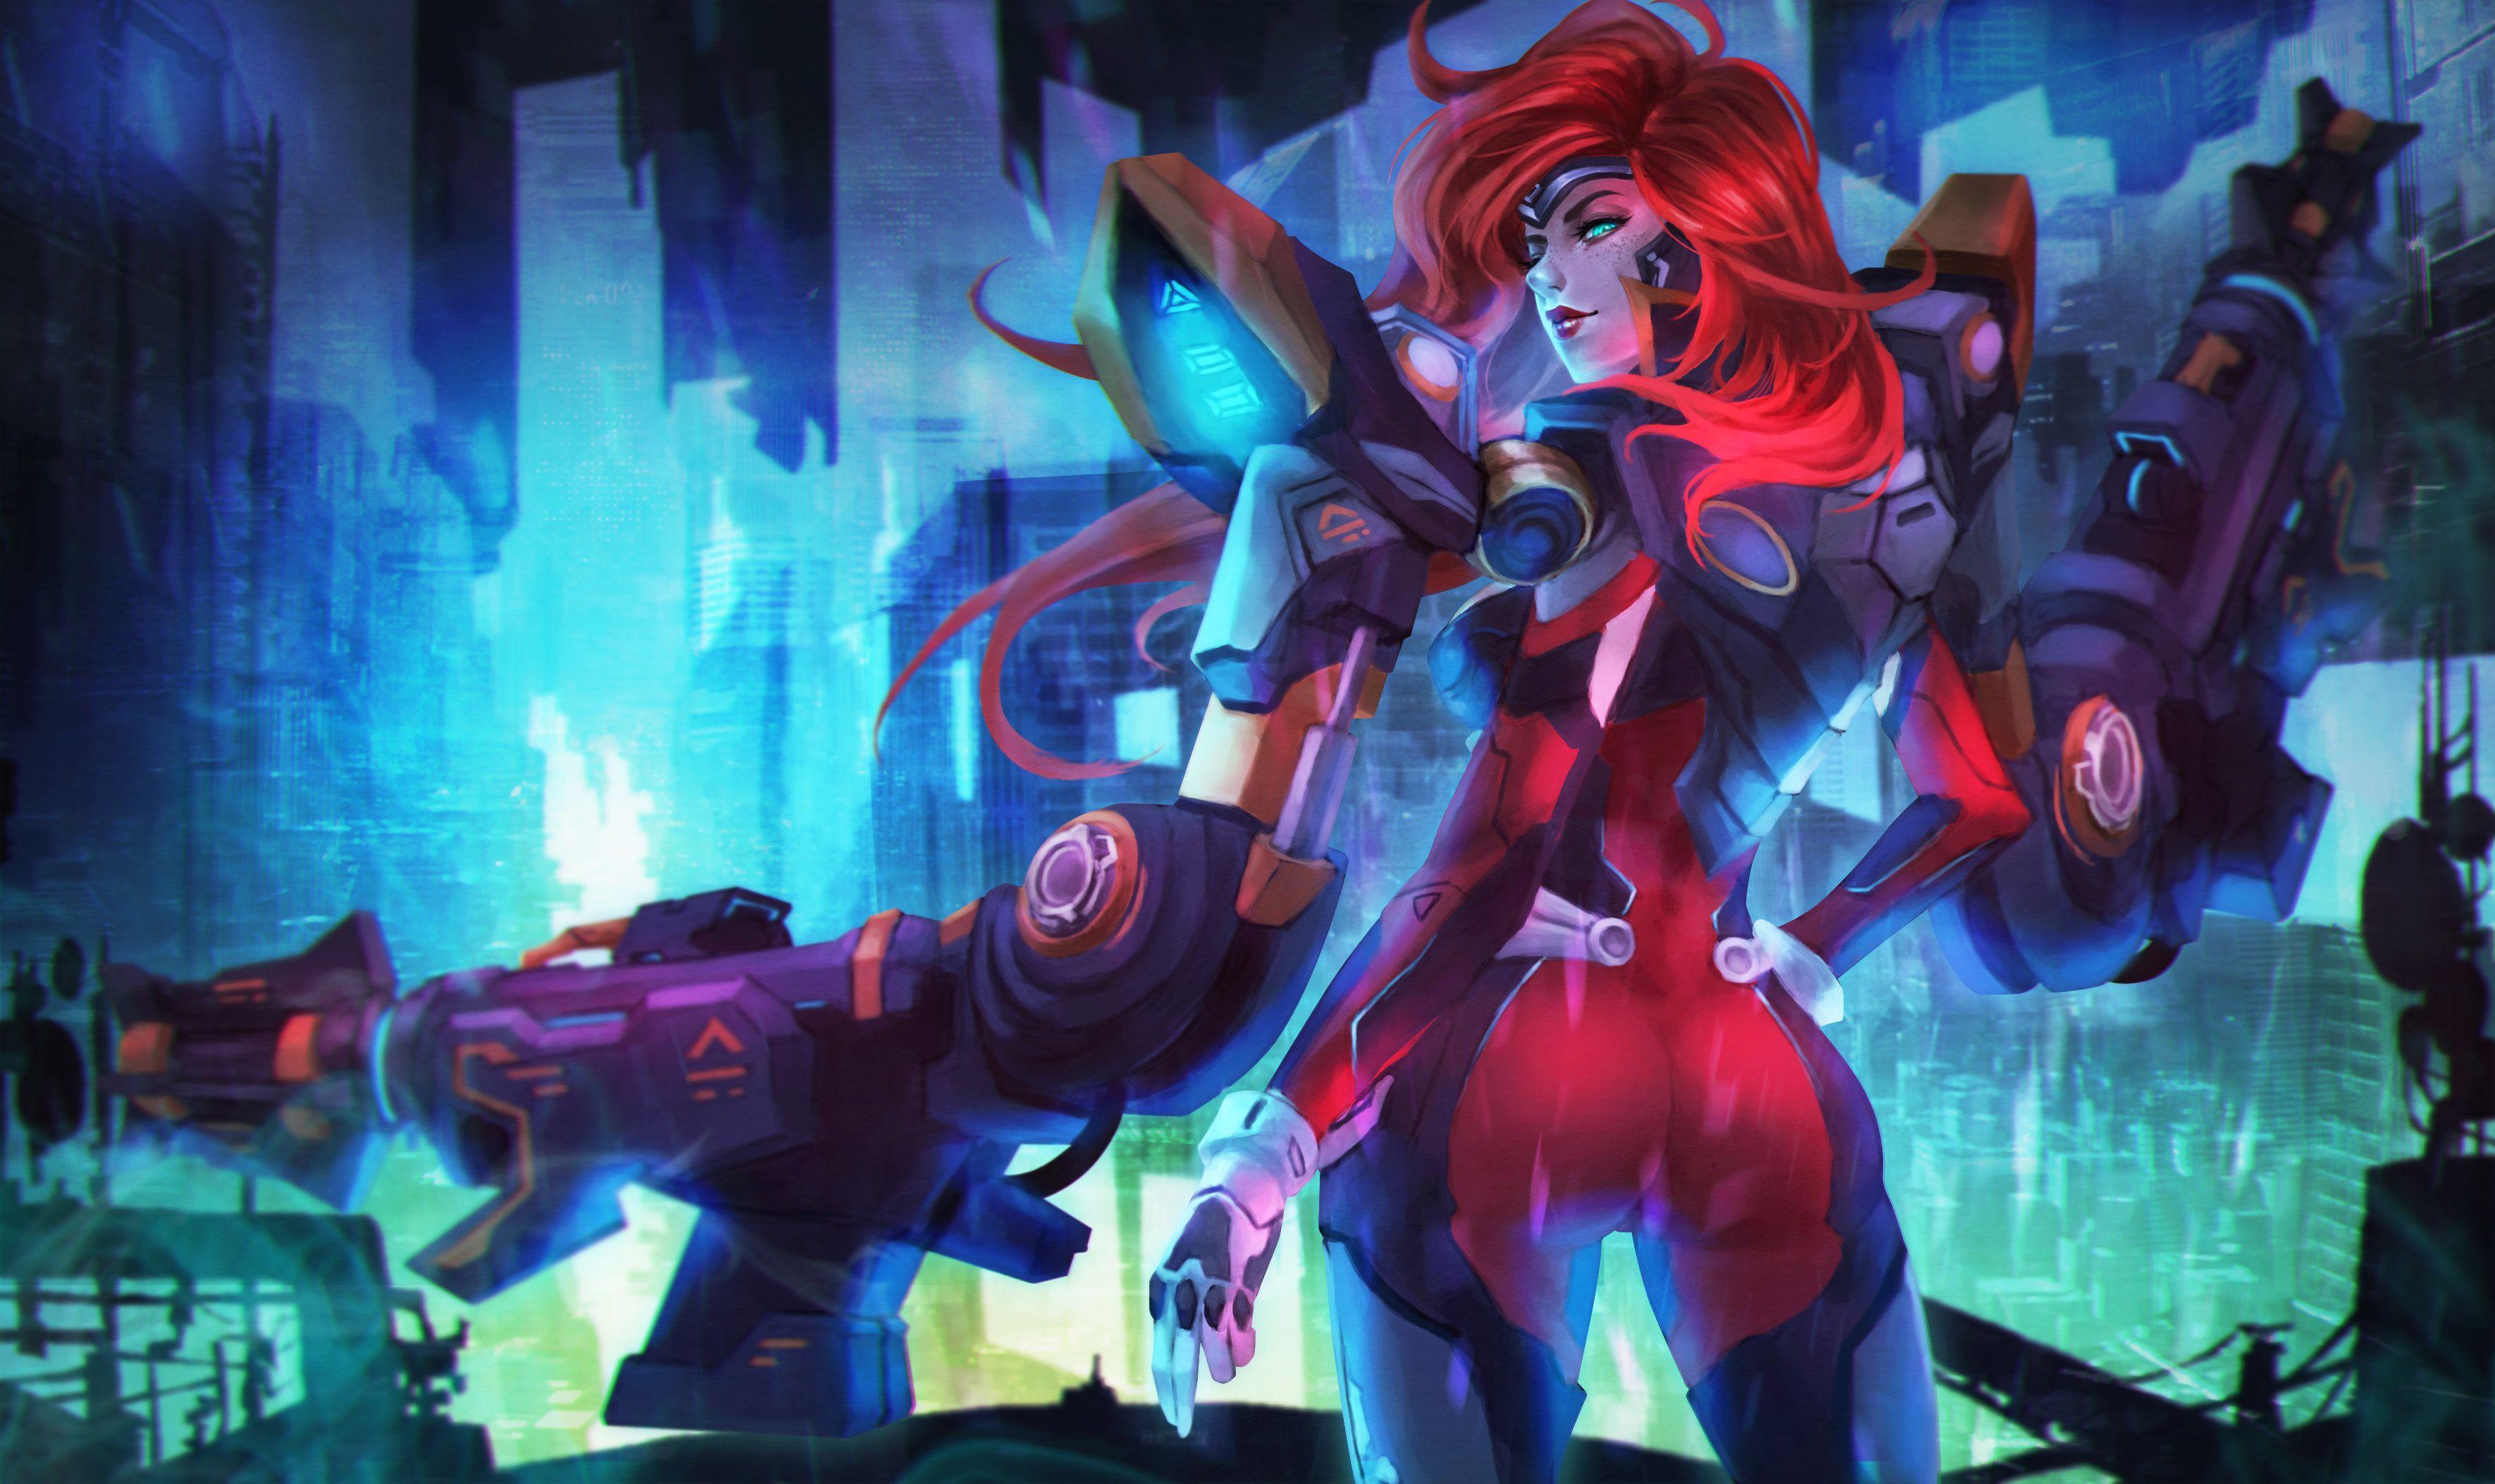 Deadly Pirate 'Miss Fortune' - League of Legends [LOL] 4K wallpaper download